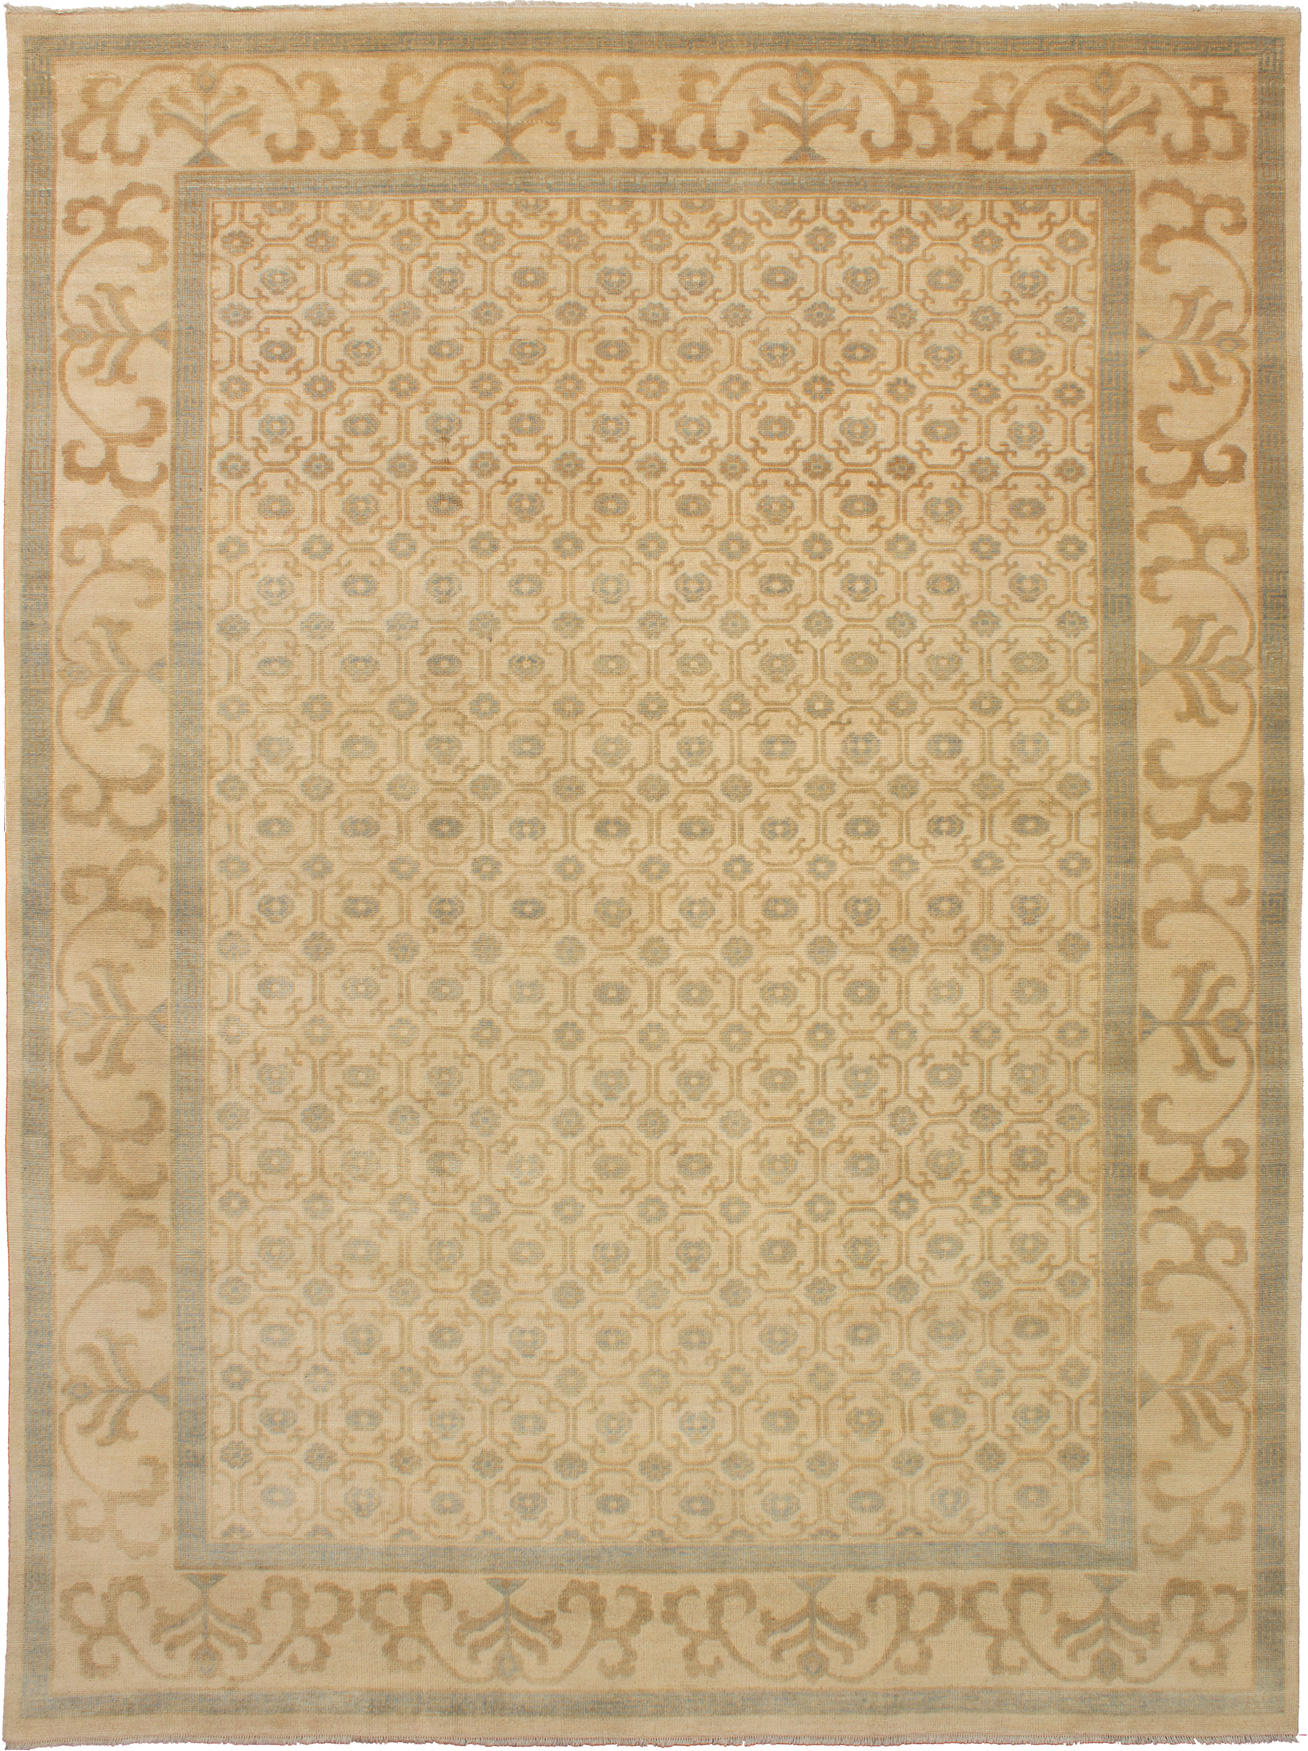 Hand-knotted Elysee Finest Ushak Cream Wool Rug 9'3" x 12'4" Size: 9'3" x 12'4"  